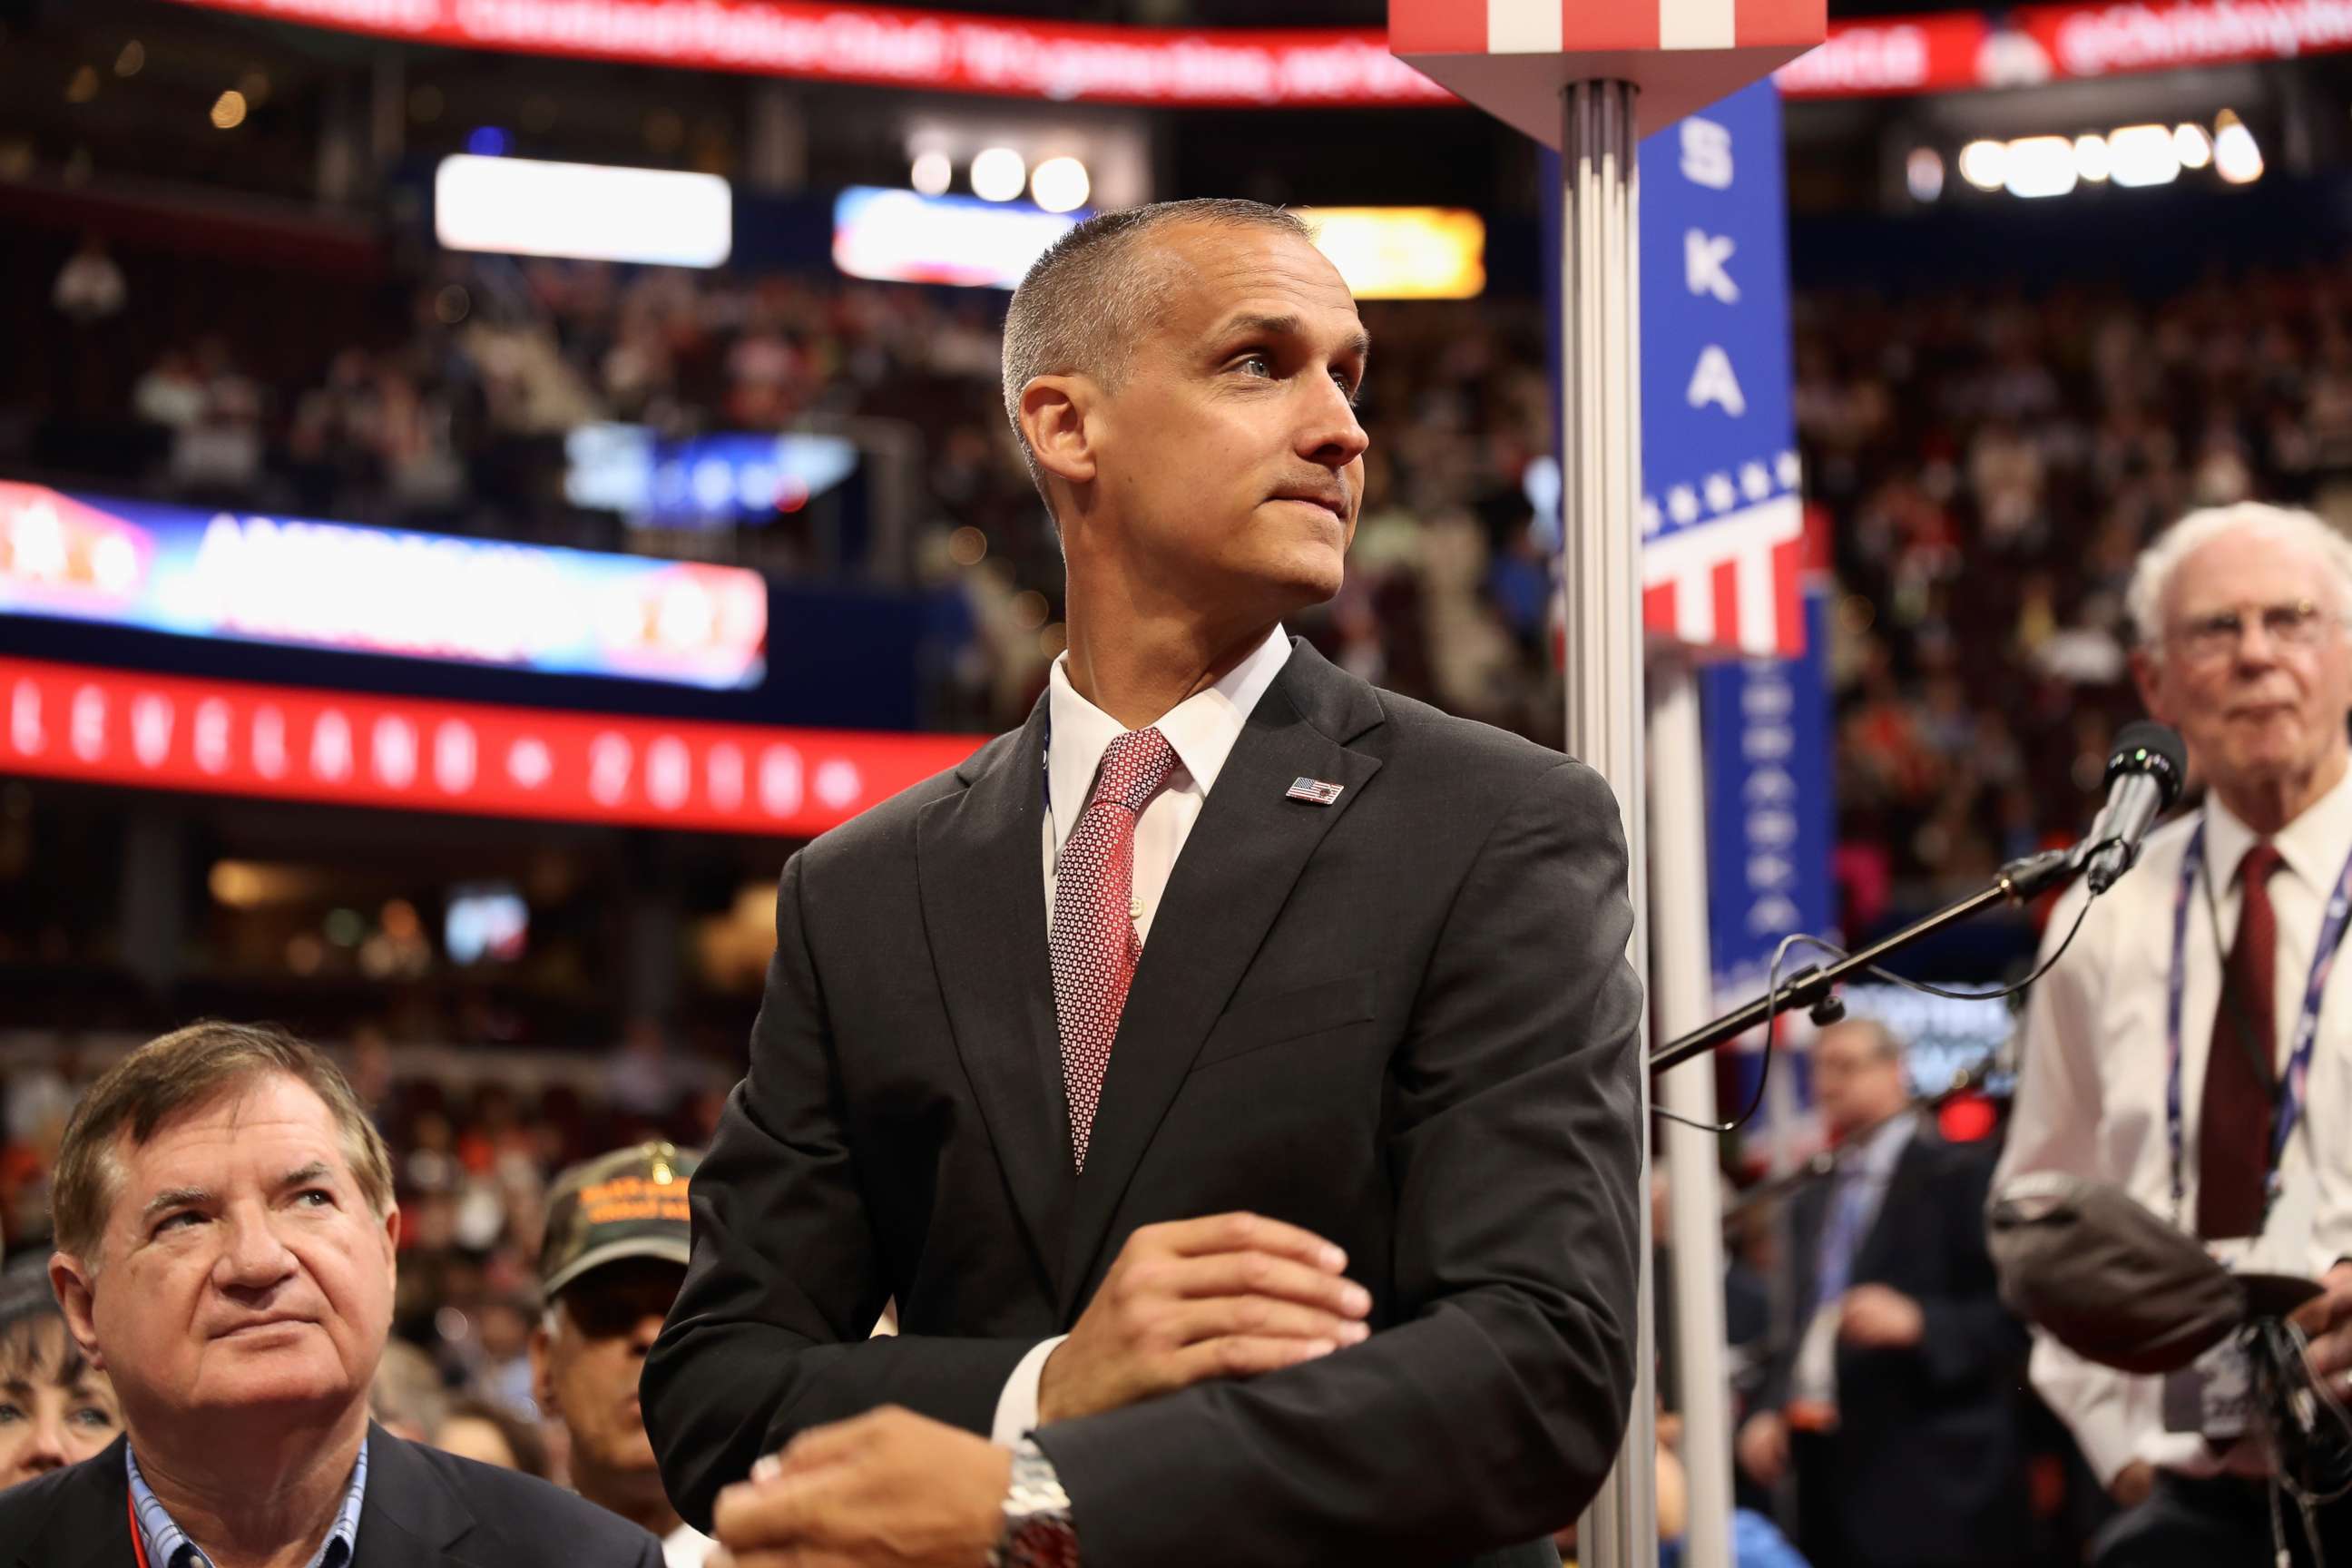 PHOTO: Corey Lewandowski, former campaign manager for Donald Trump, walks the floor on the first day of the Republican National Convention, July 18, 2016.